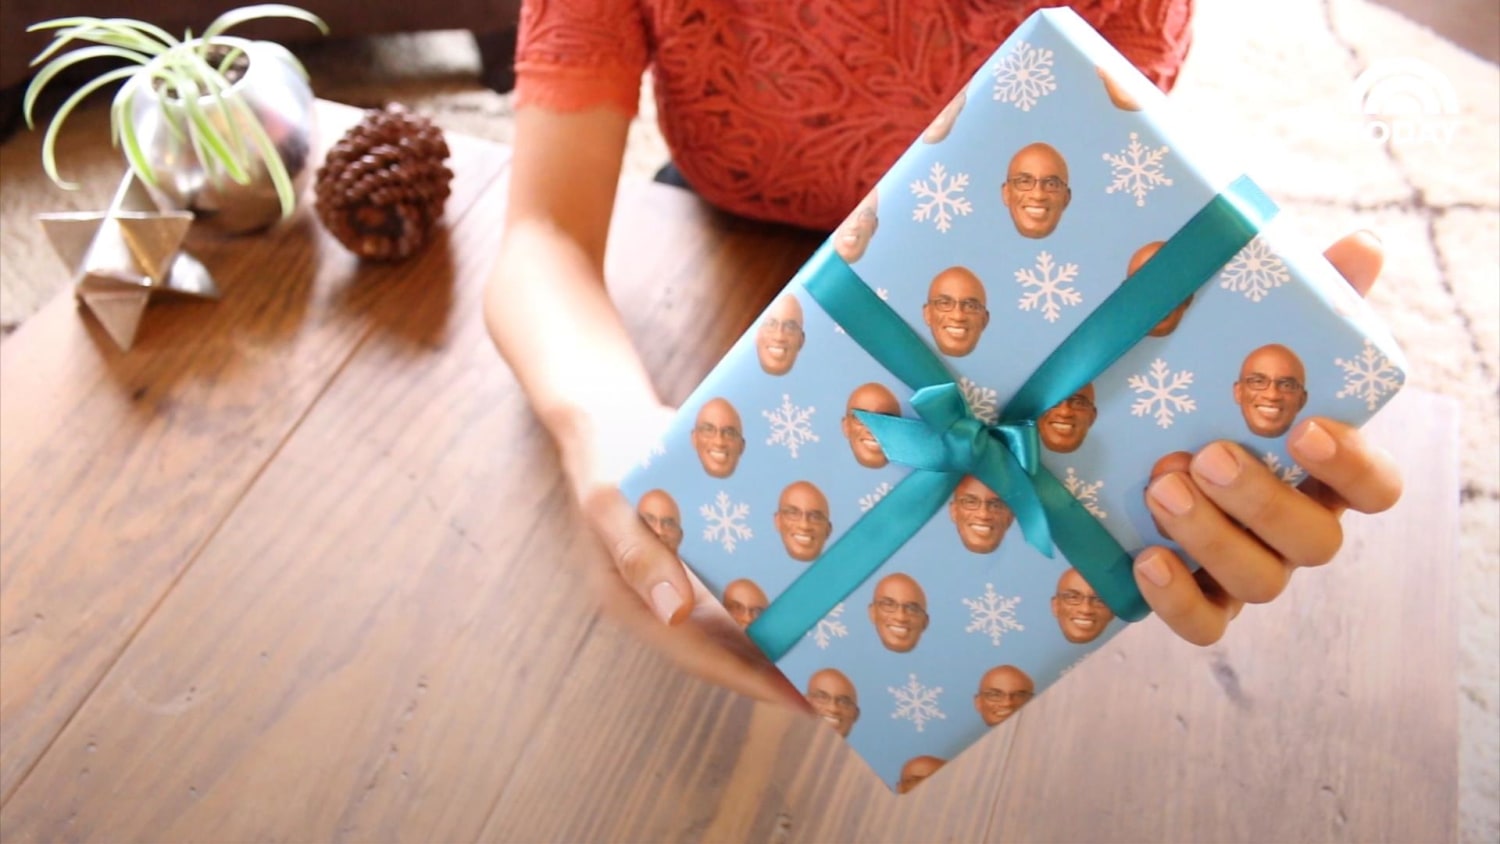 Paper-free gift-wrapping hack takes 30 seconds or less